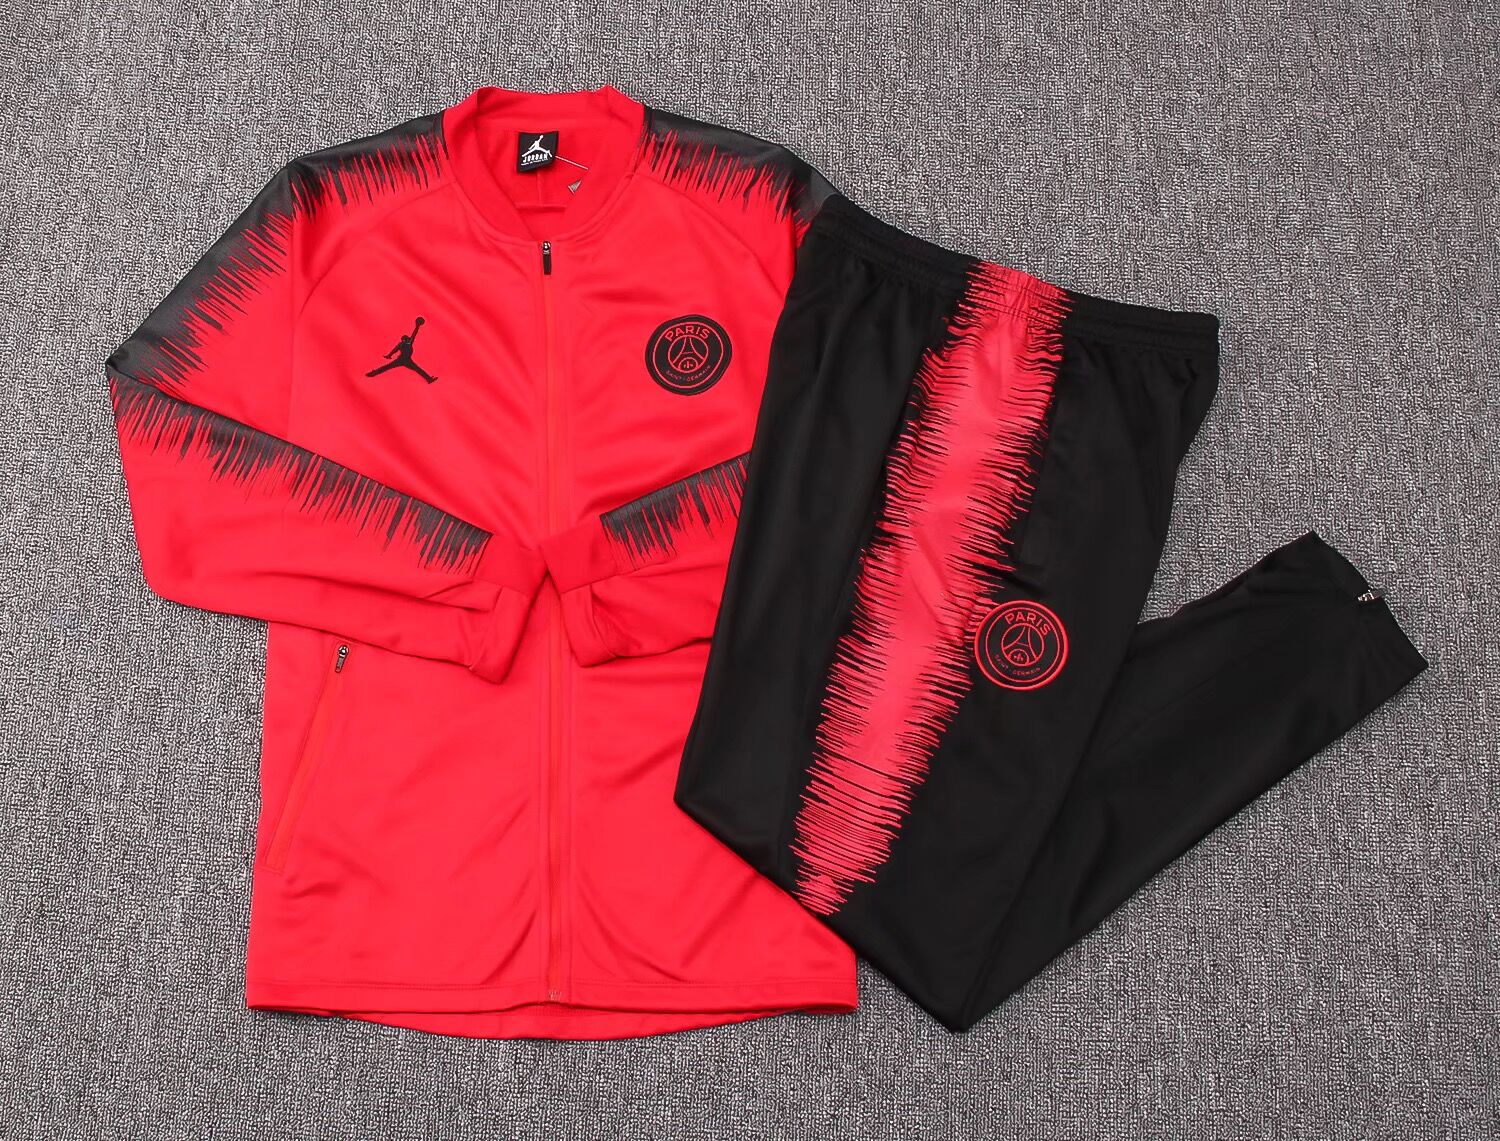 2019-20 PSG Red Tracksuit Kits - Click Image to Close